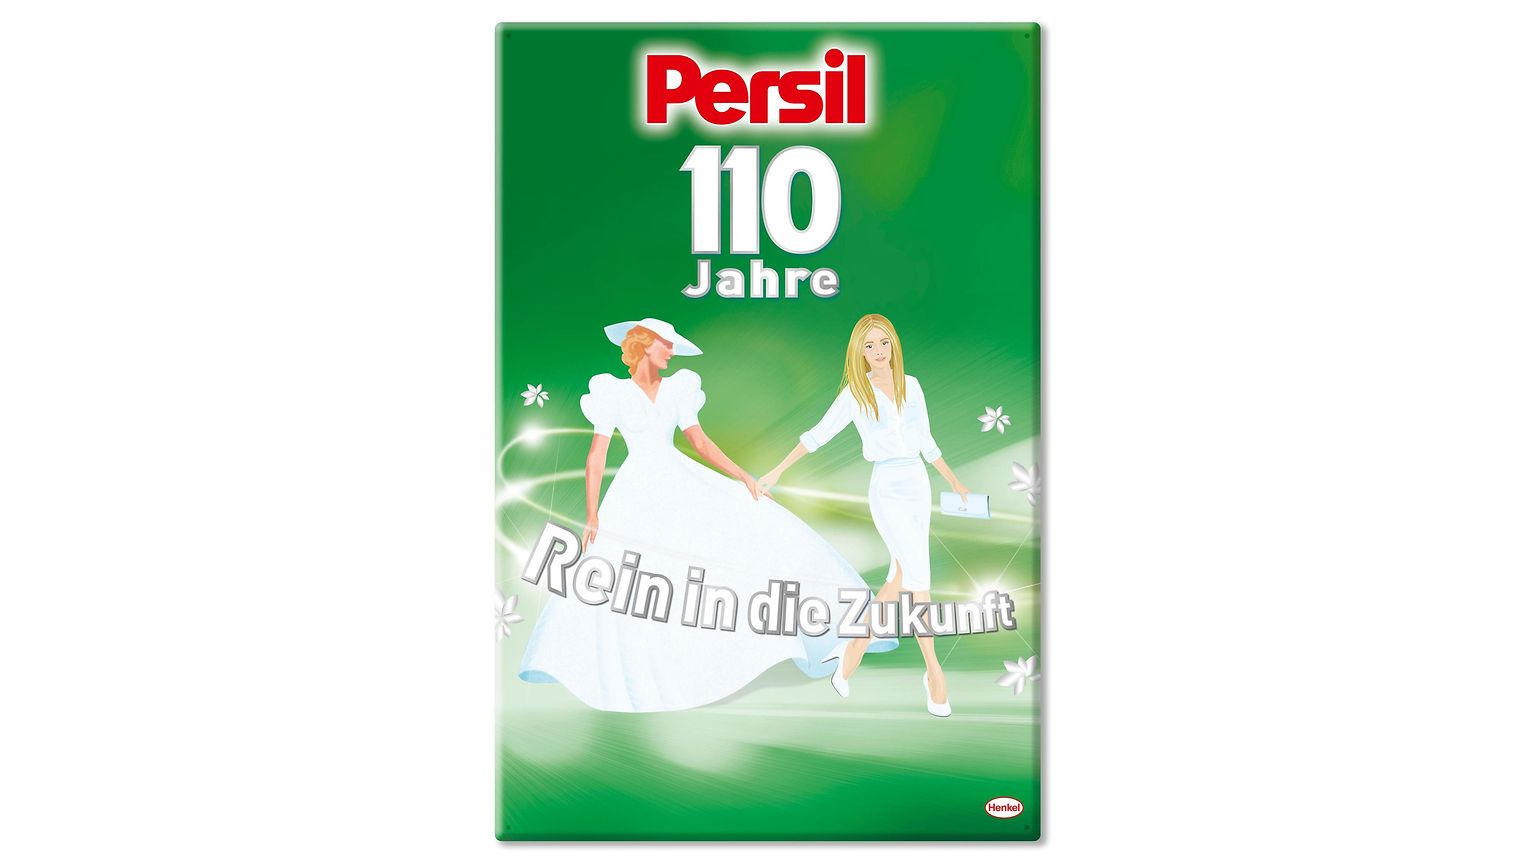 
Persil turns 110 years old.